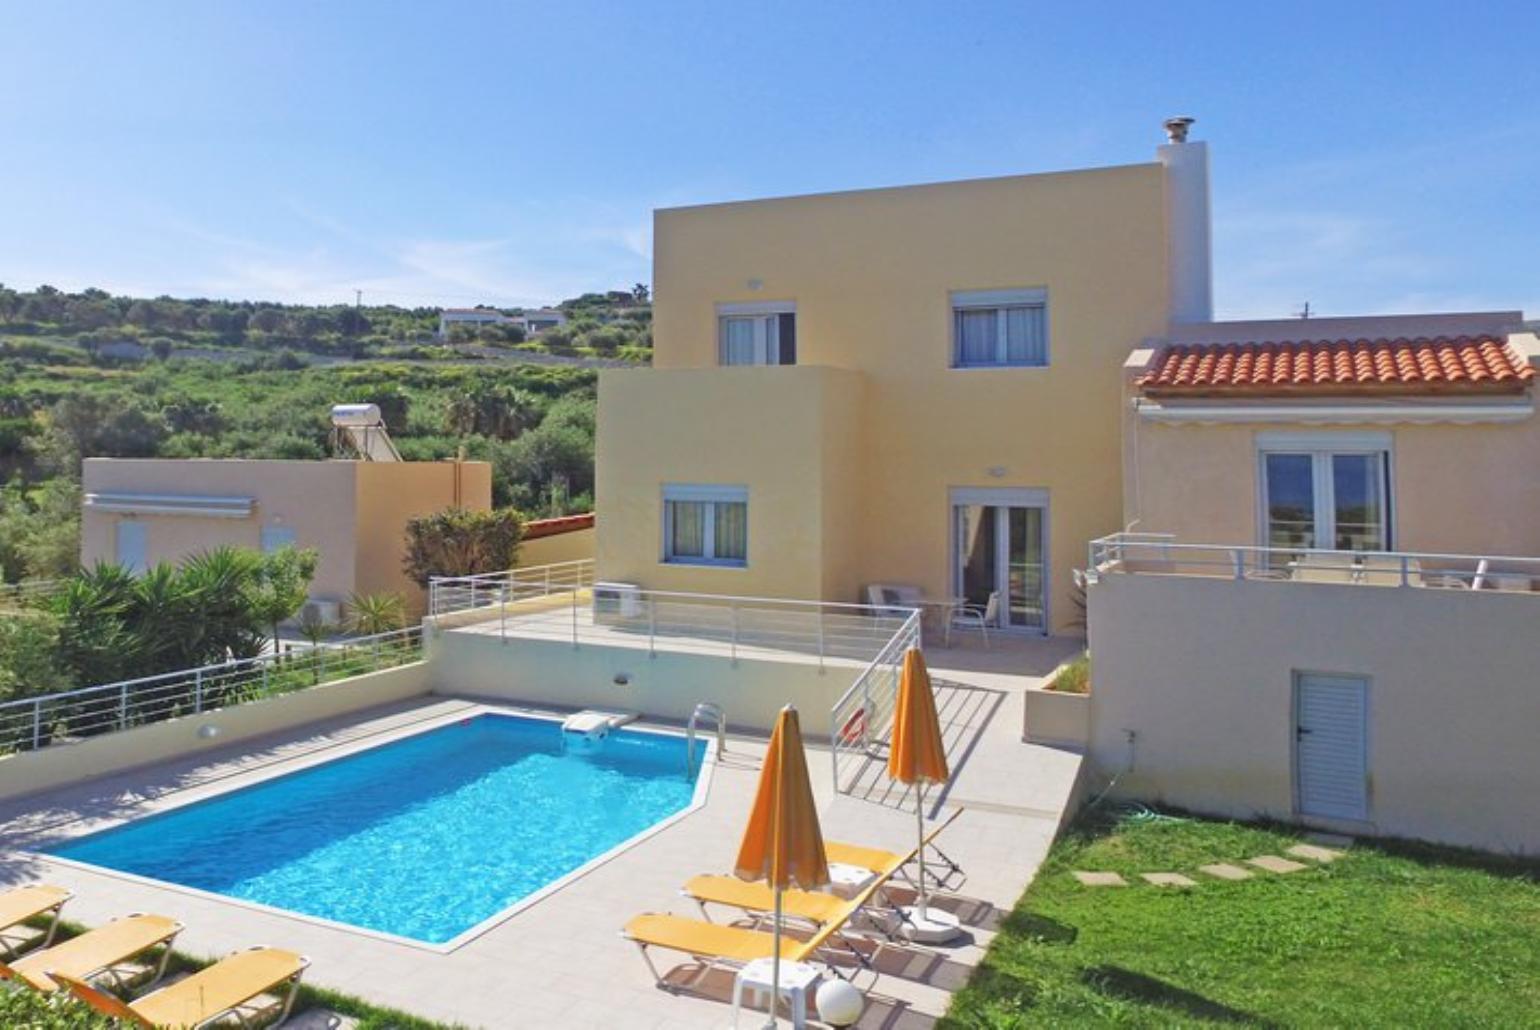 ,Beautiful villa with private pool, terrace, and lawn 